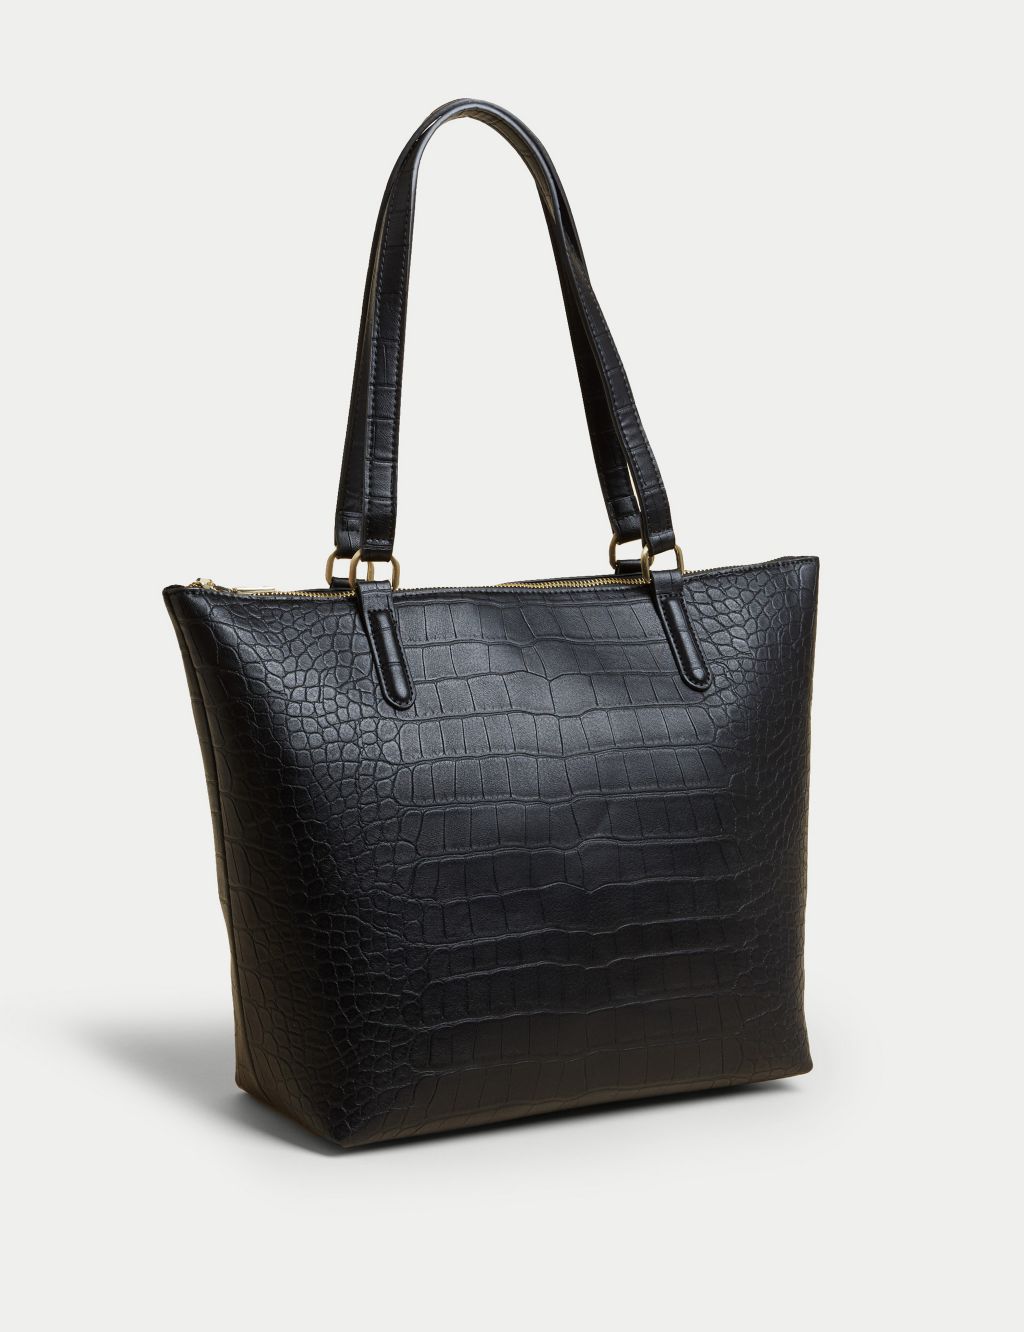 Faux Leather Croc Effect Tote Bag image 4